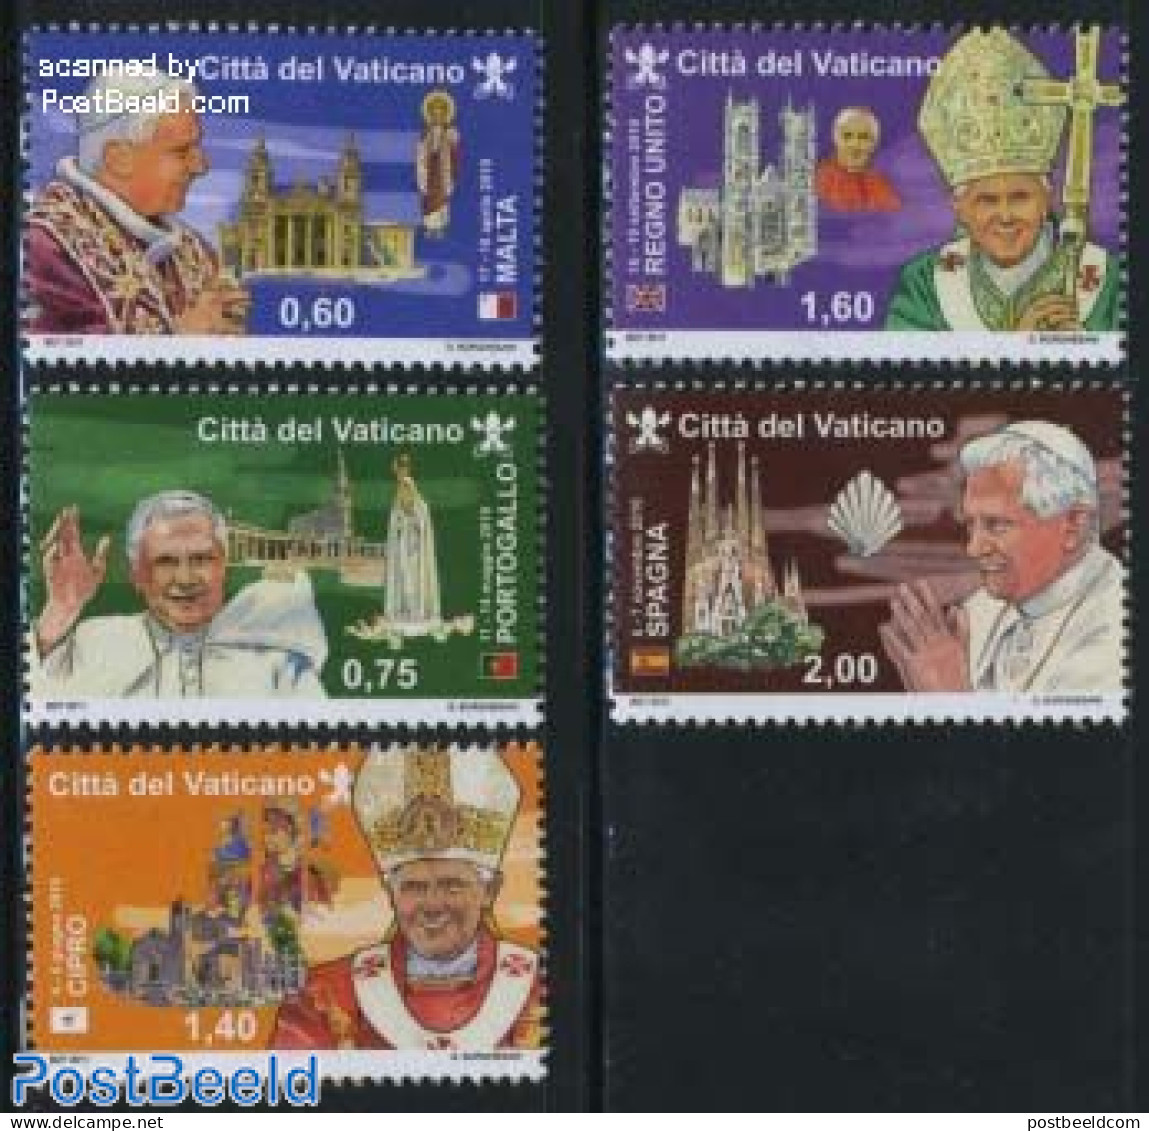 Vatican 2011 Popes Travels 5v, Mint NH, Religion - Churches, Temples, Mosques, Synagogues - Pope - Neufs